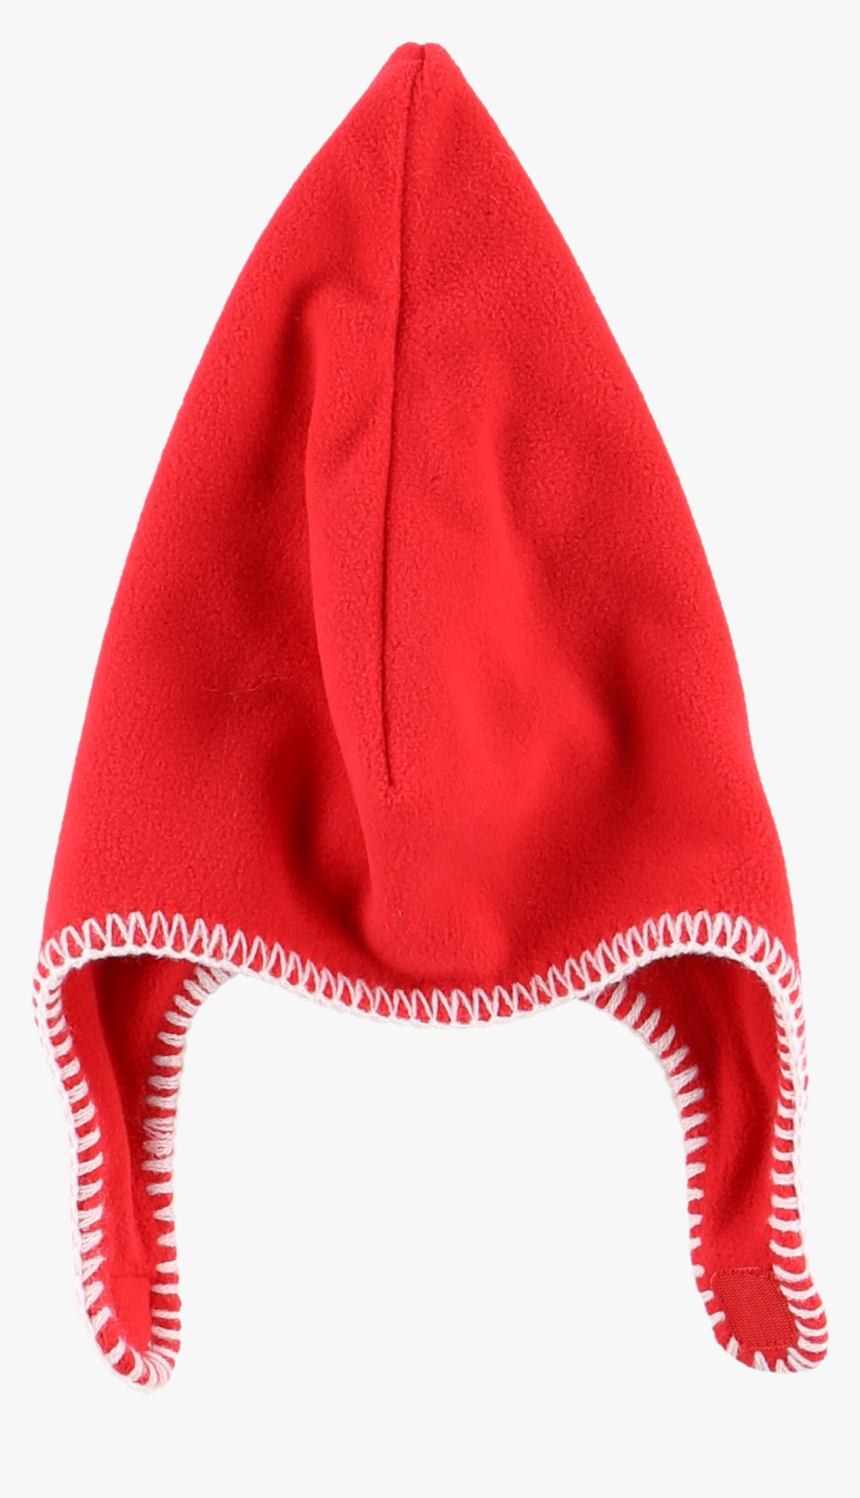 Gnome Hat Png, Transparent Png, Free Download